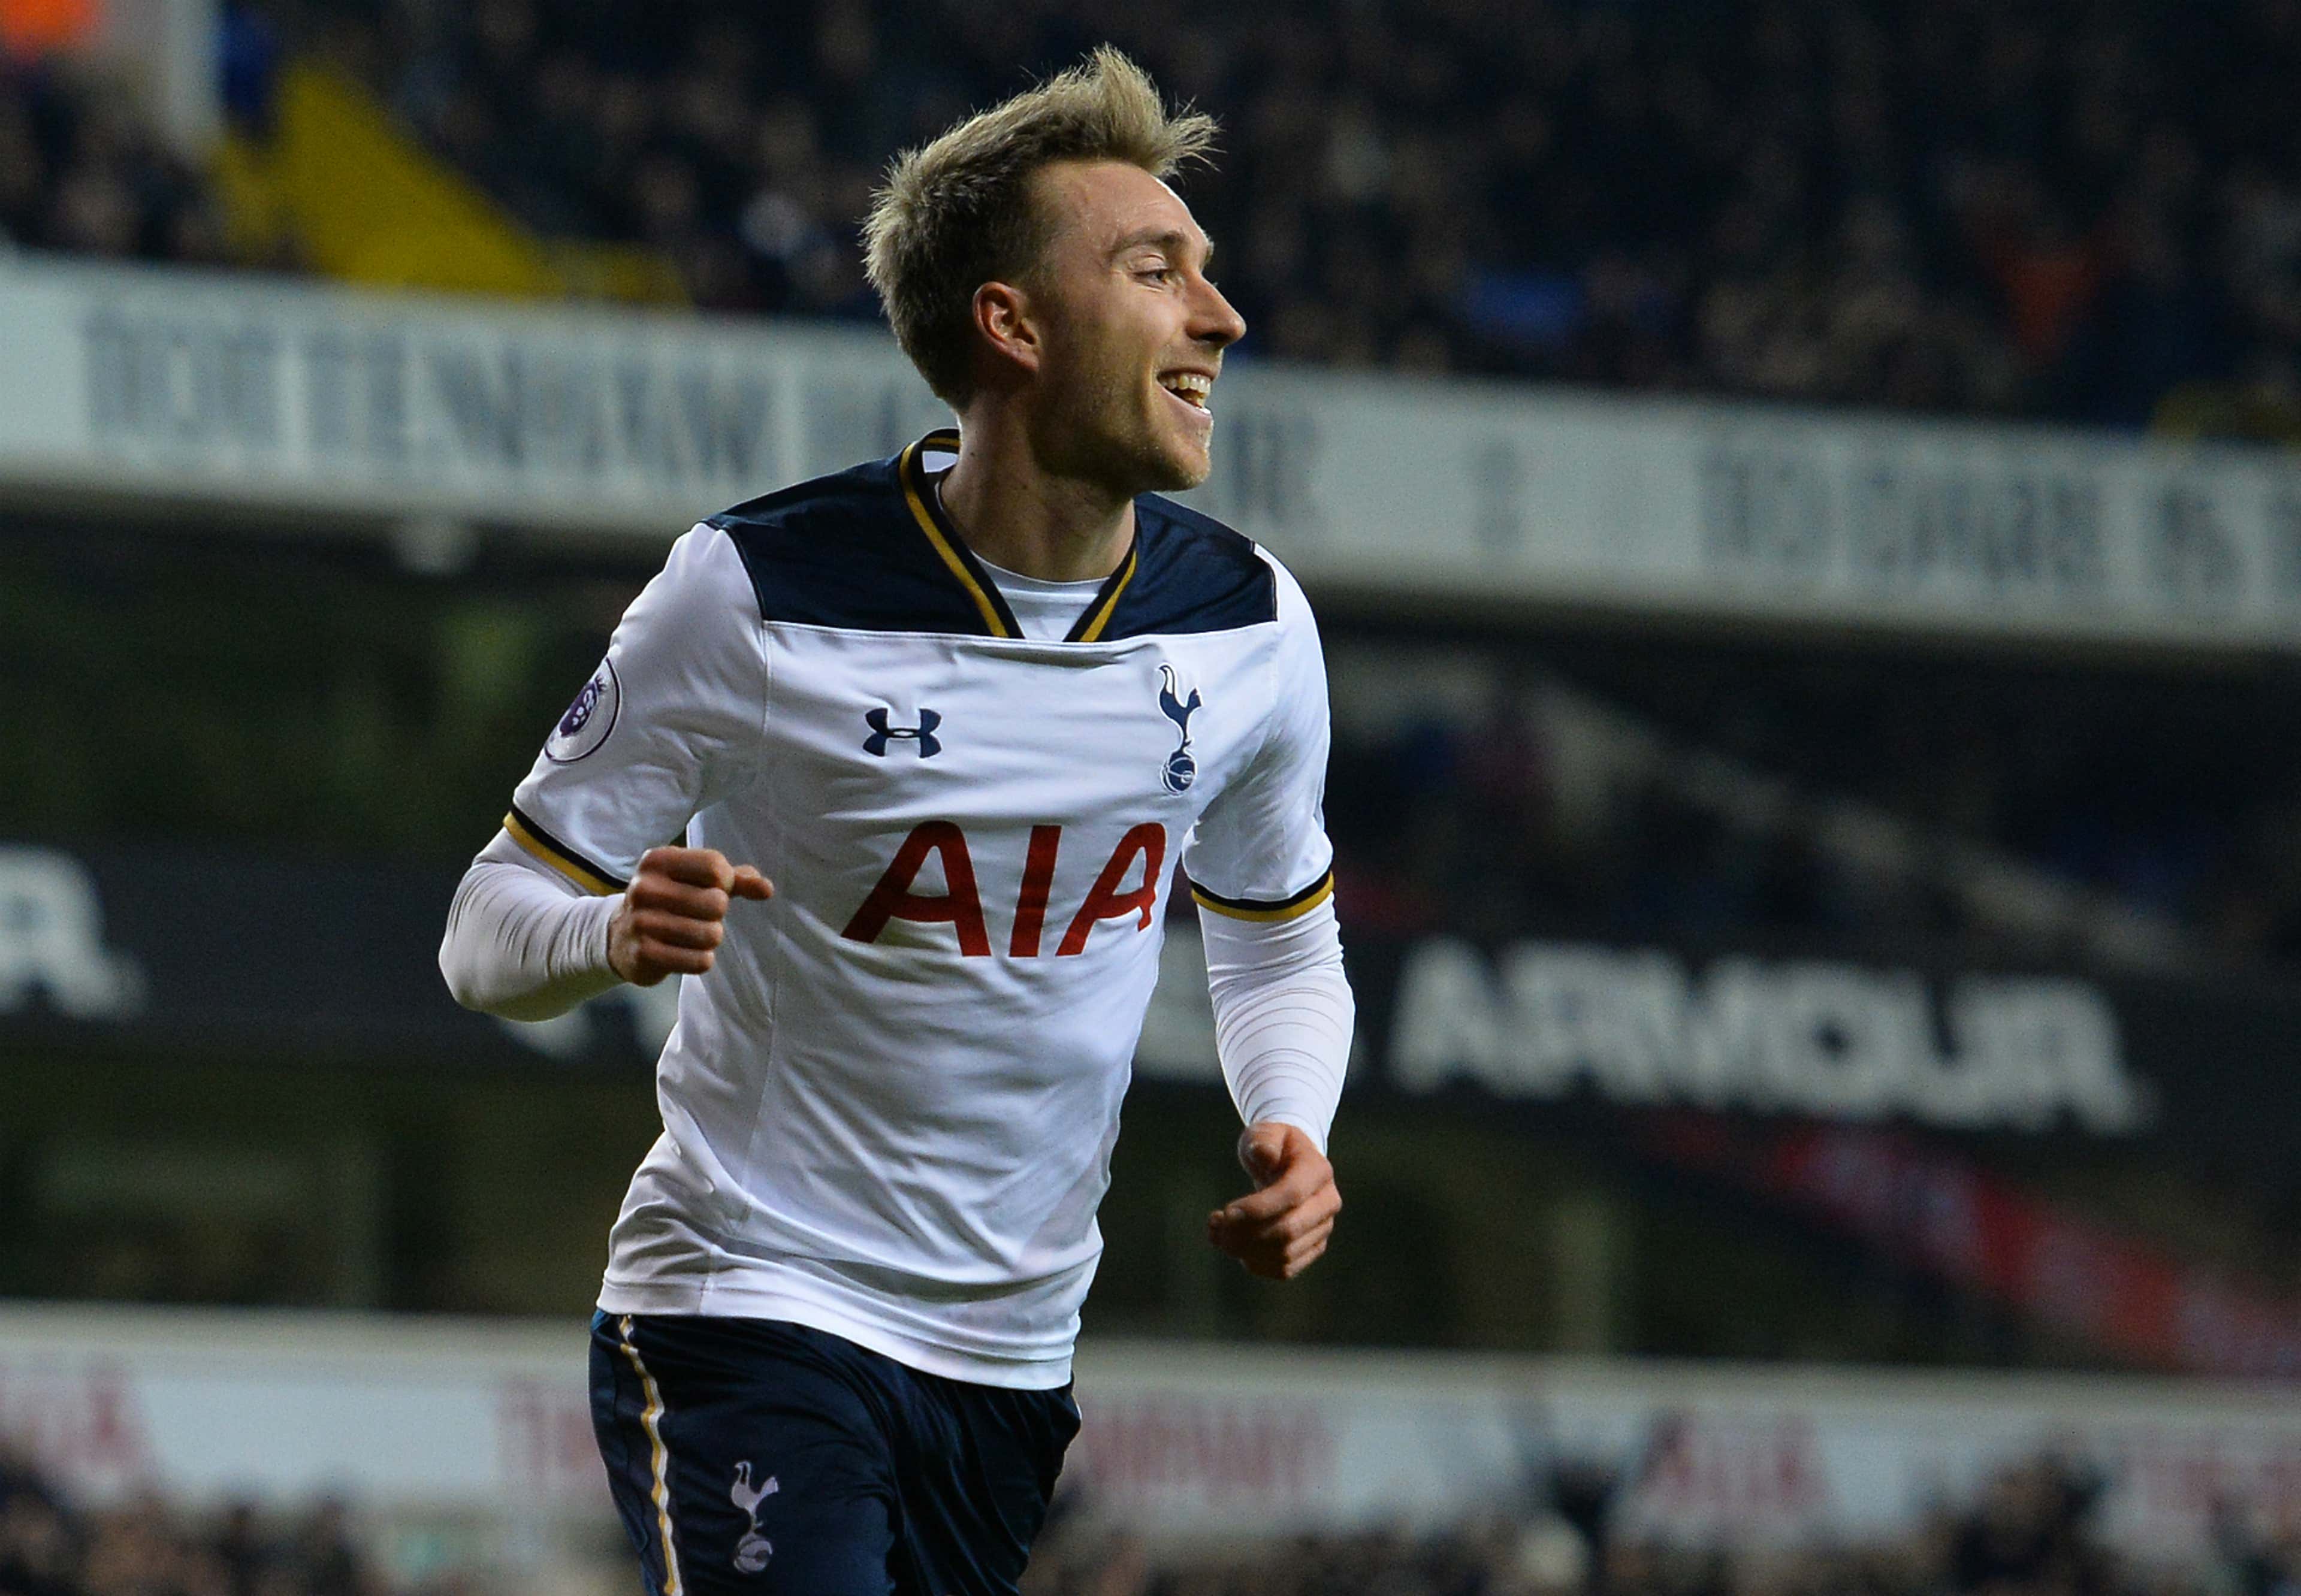 Transfer news: Spurs star Christian Eriksen admits Barcelona are a 'dream'  but hints again at snub